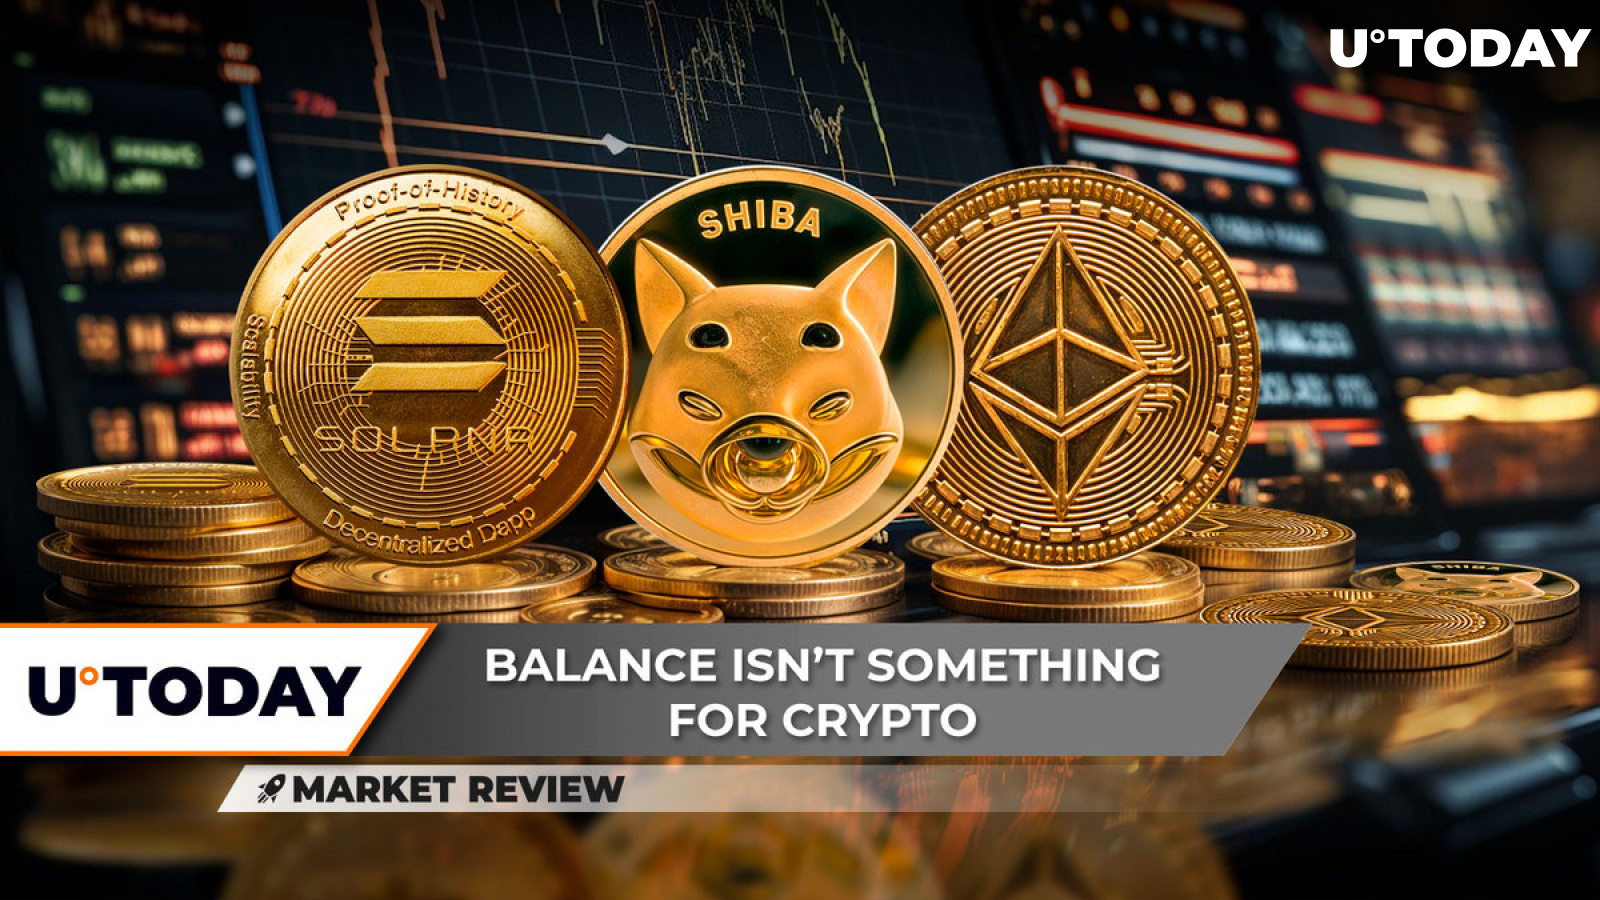 Shiba Inu (SHIB) on Its Way to Reversal, Solana (SOL) Hanging From Edge, Ethereum (ETH ) Lost $3,500